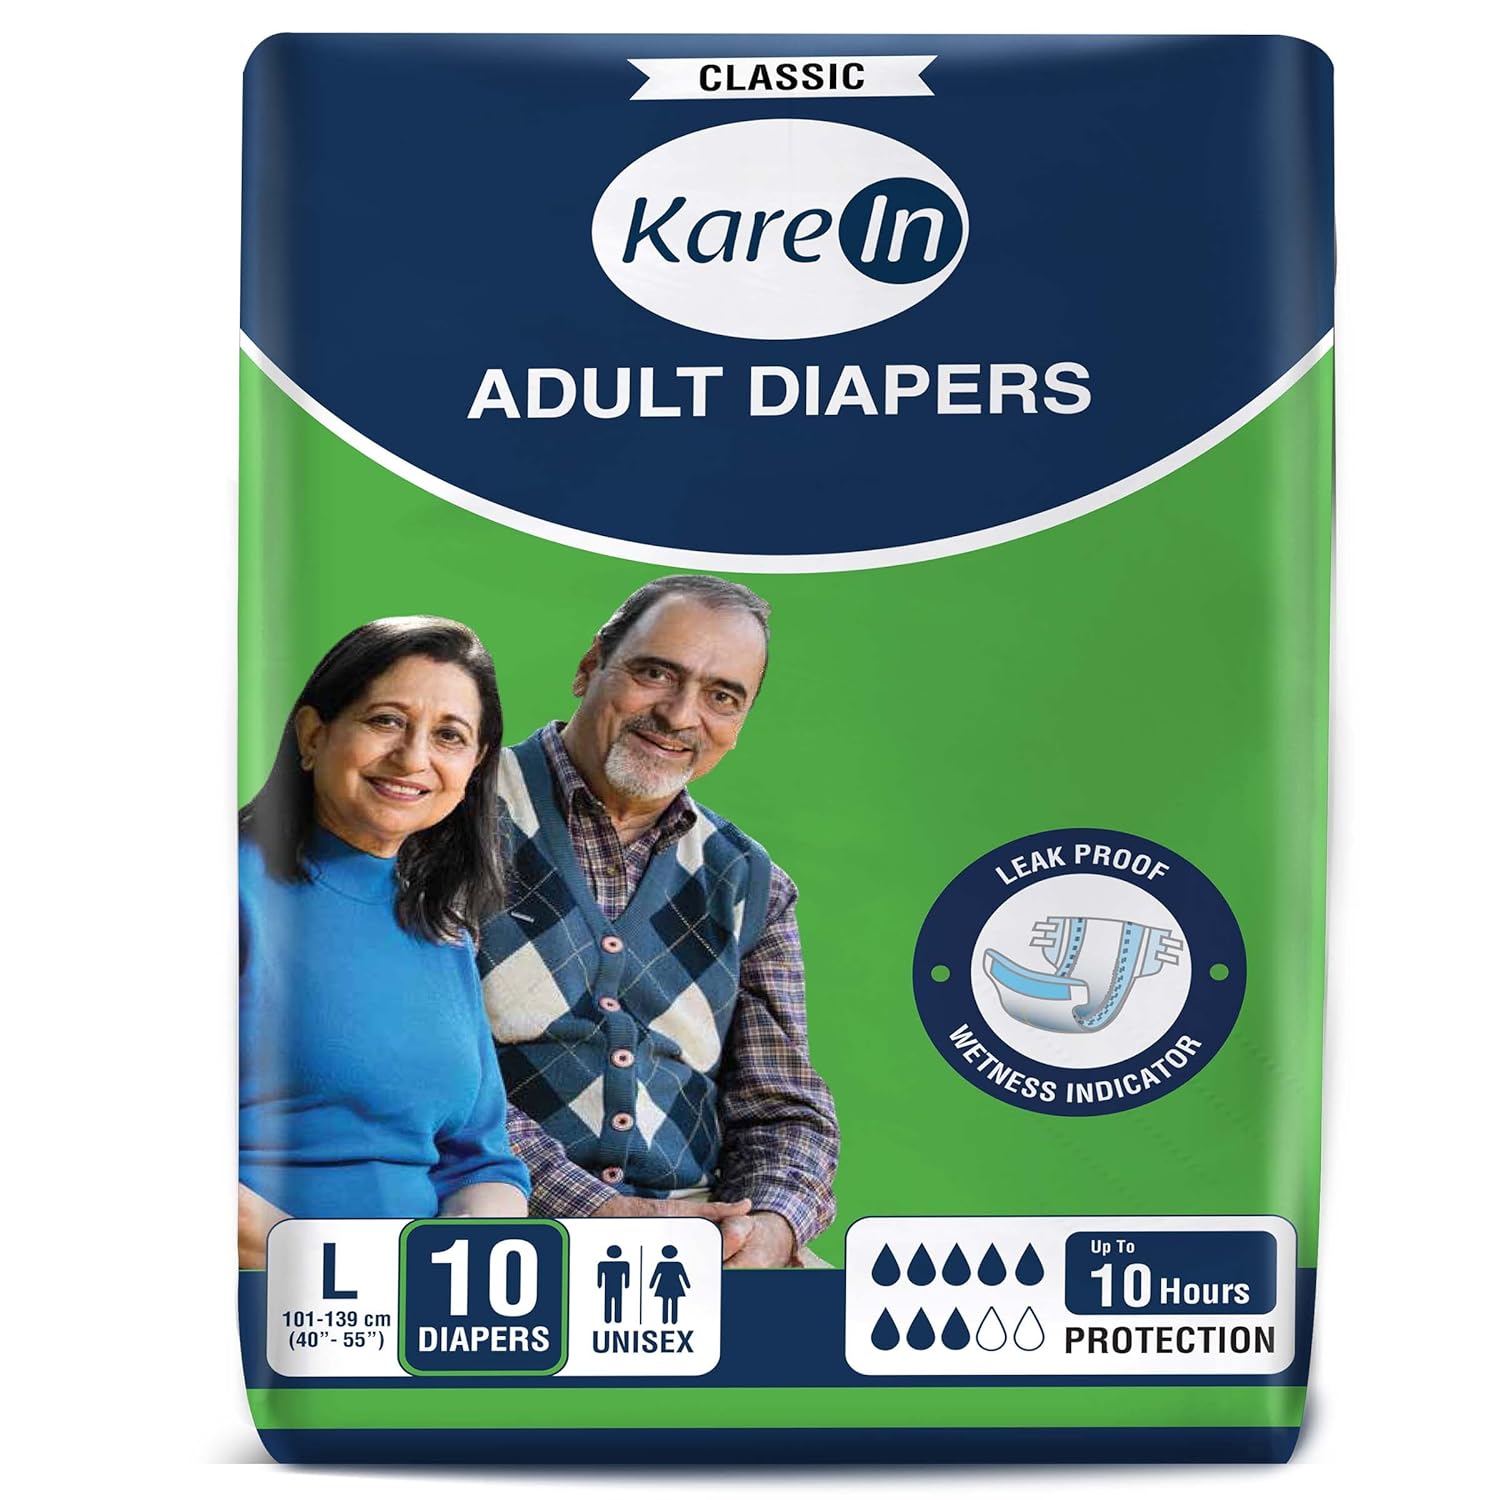 Today offer Adult Diapers and disposal bags